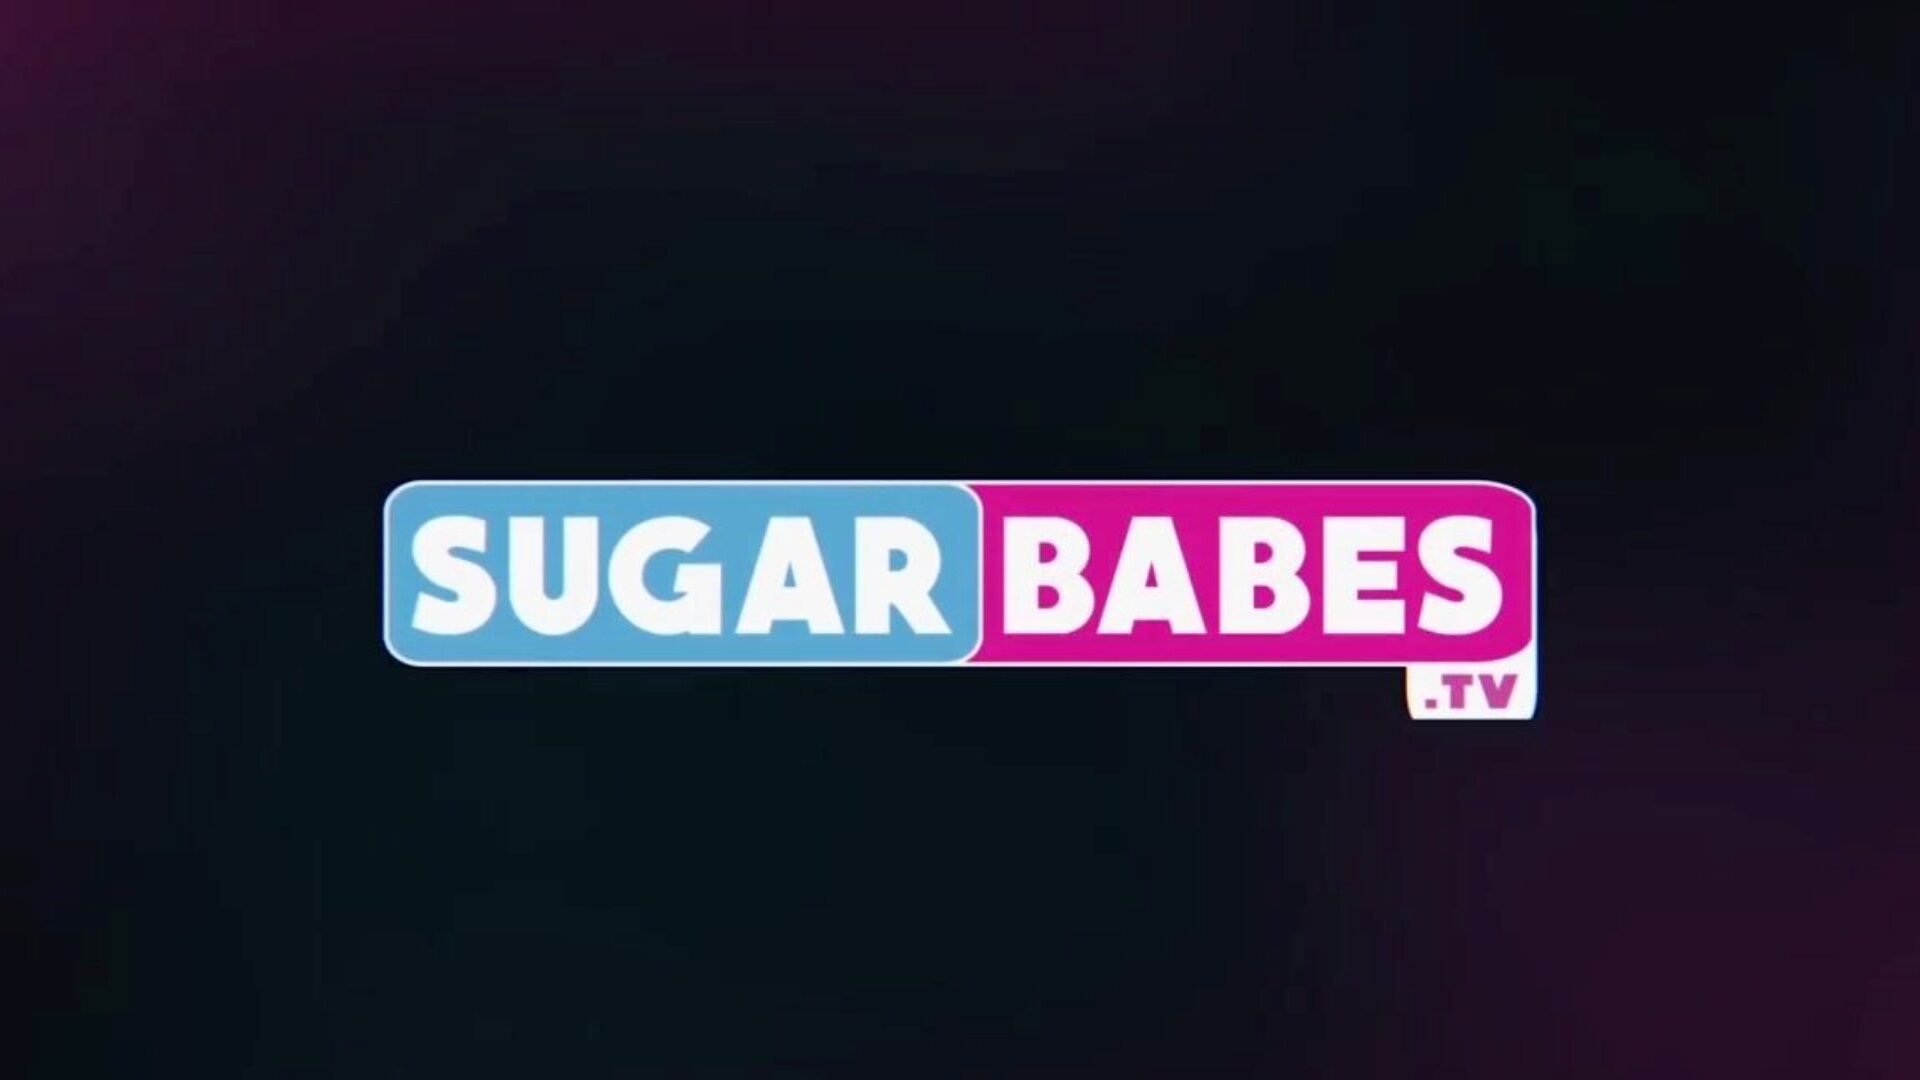 sugarbabestv the bottle, free sugar honeys tv hd porn 6b watch sugarbabestv the bottle video on xhamster, the best hd lovemaking tube web site with tonnes of free sugar babes tv sexe lesbien & amour pornographie vids